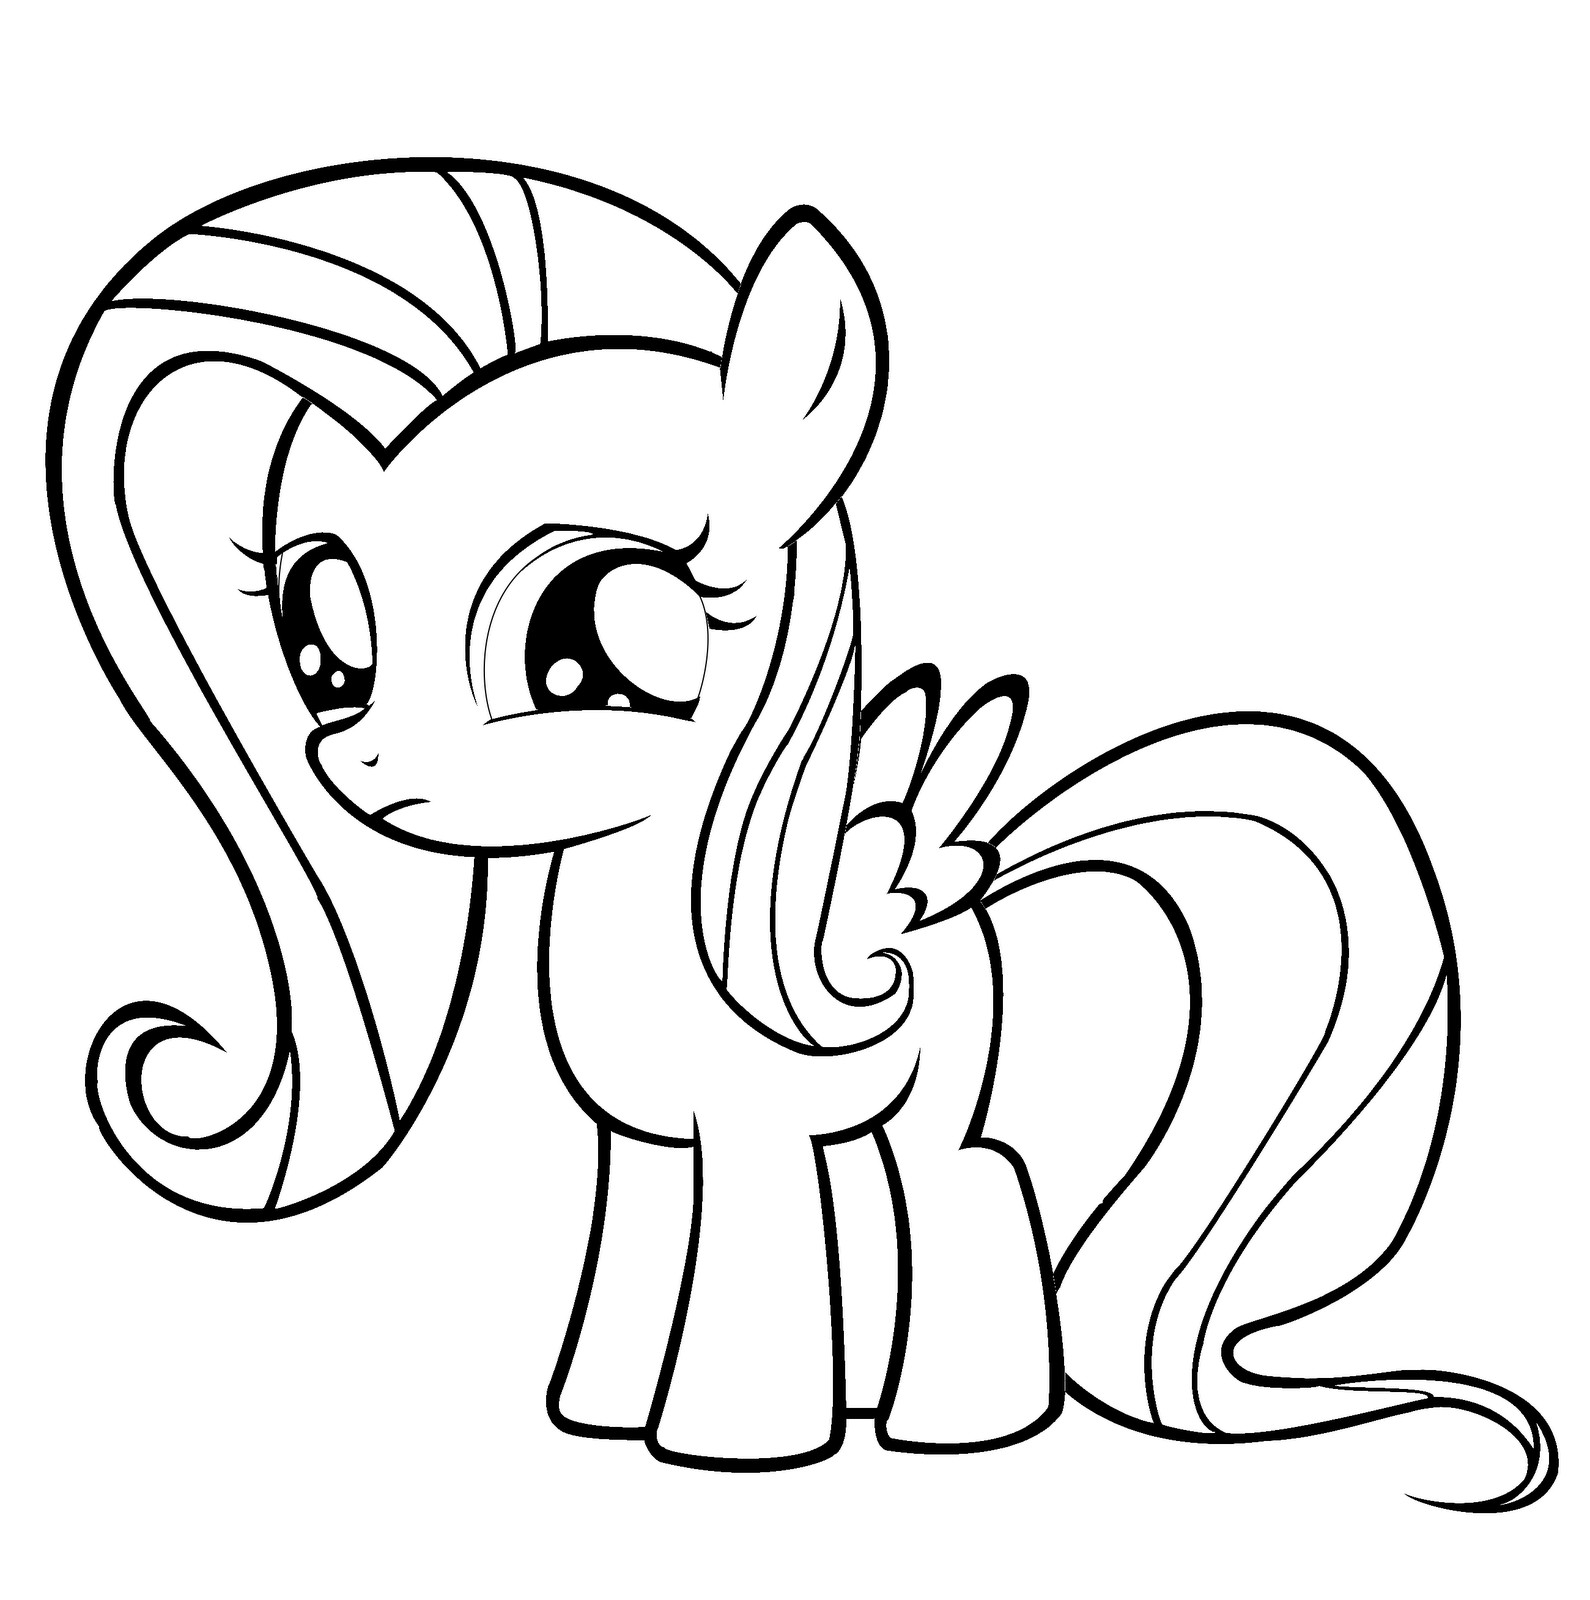 Baby Pony Coloring Pages
 Coloring Fun Young fluttershy